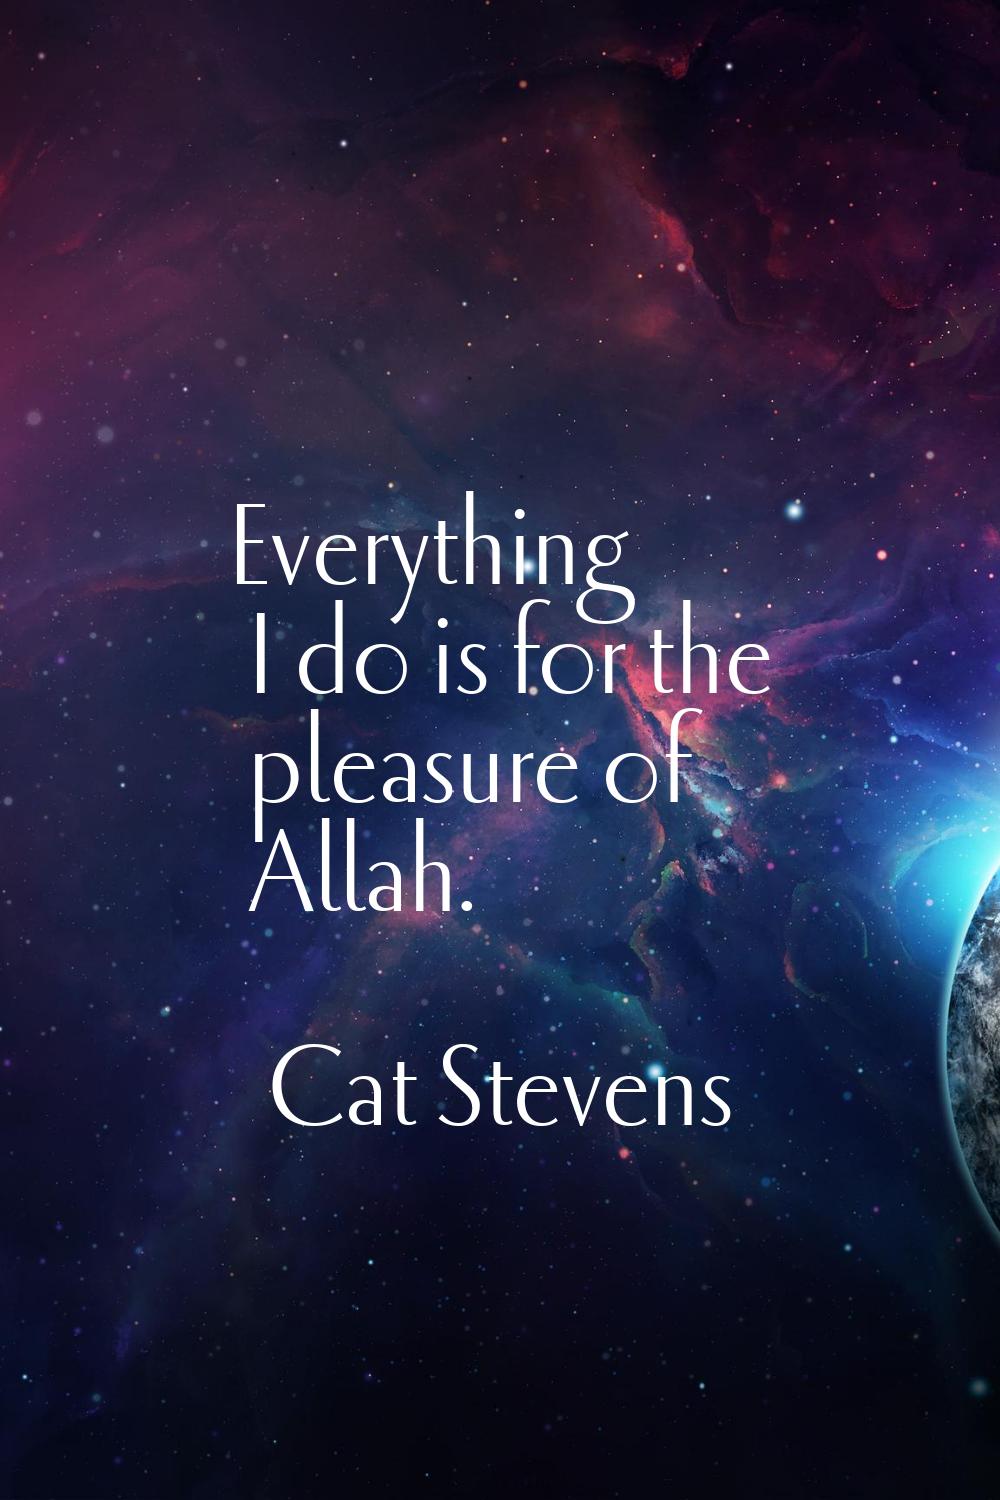 Everything I do is for the pleasure of Allah.